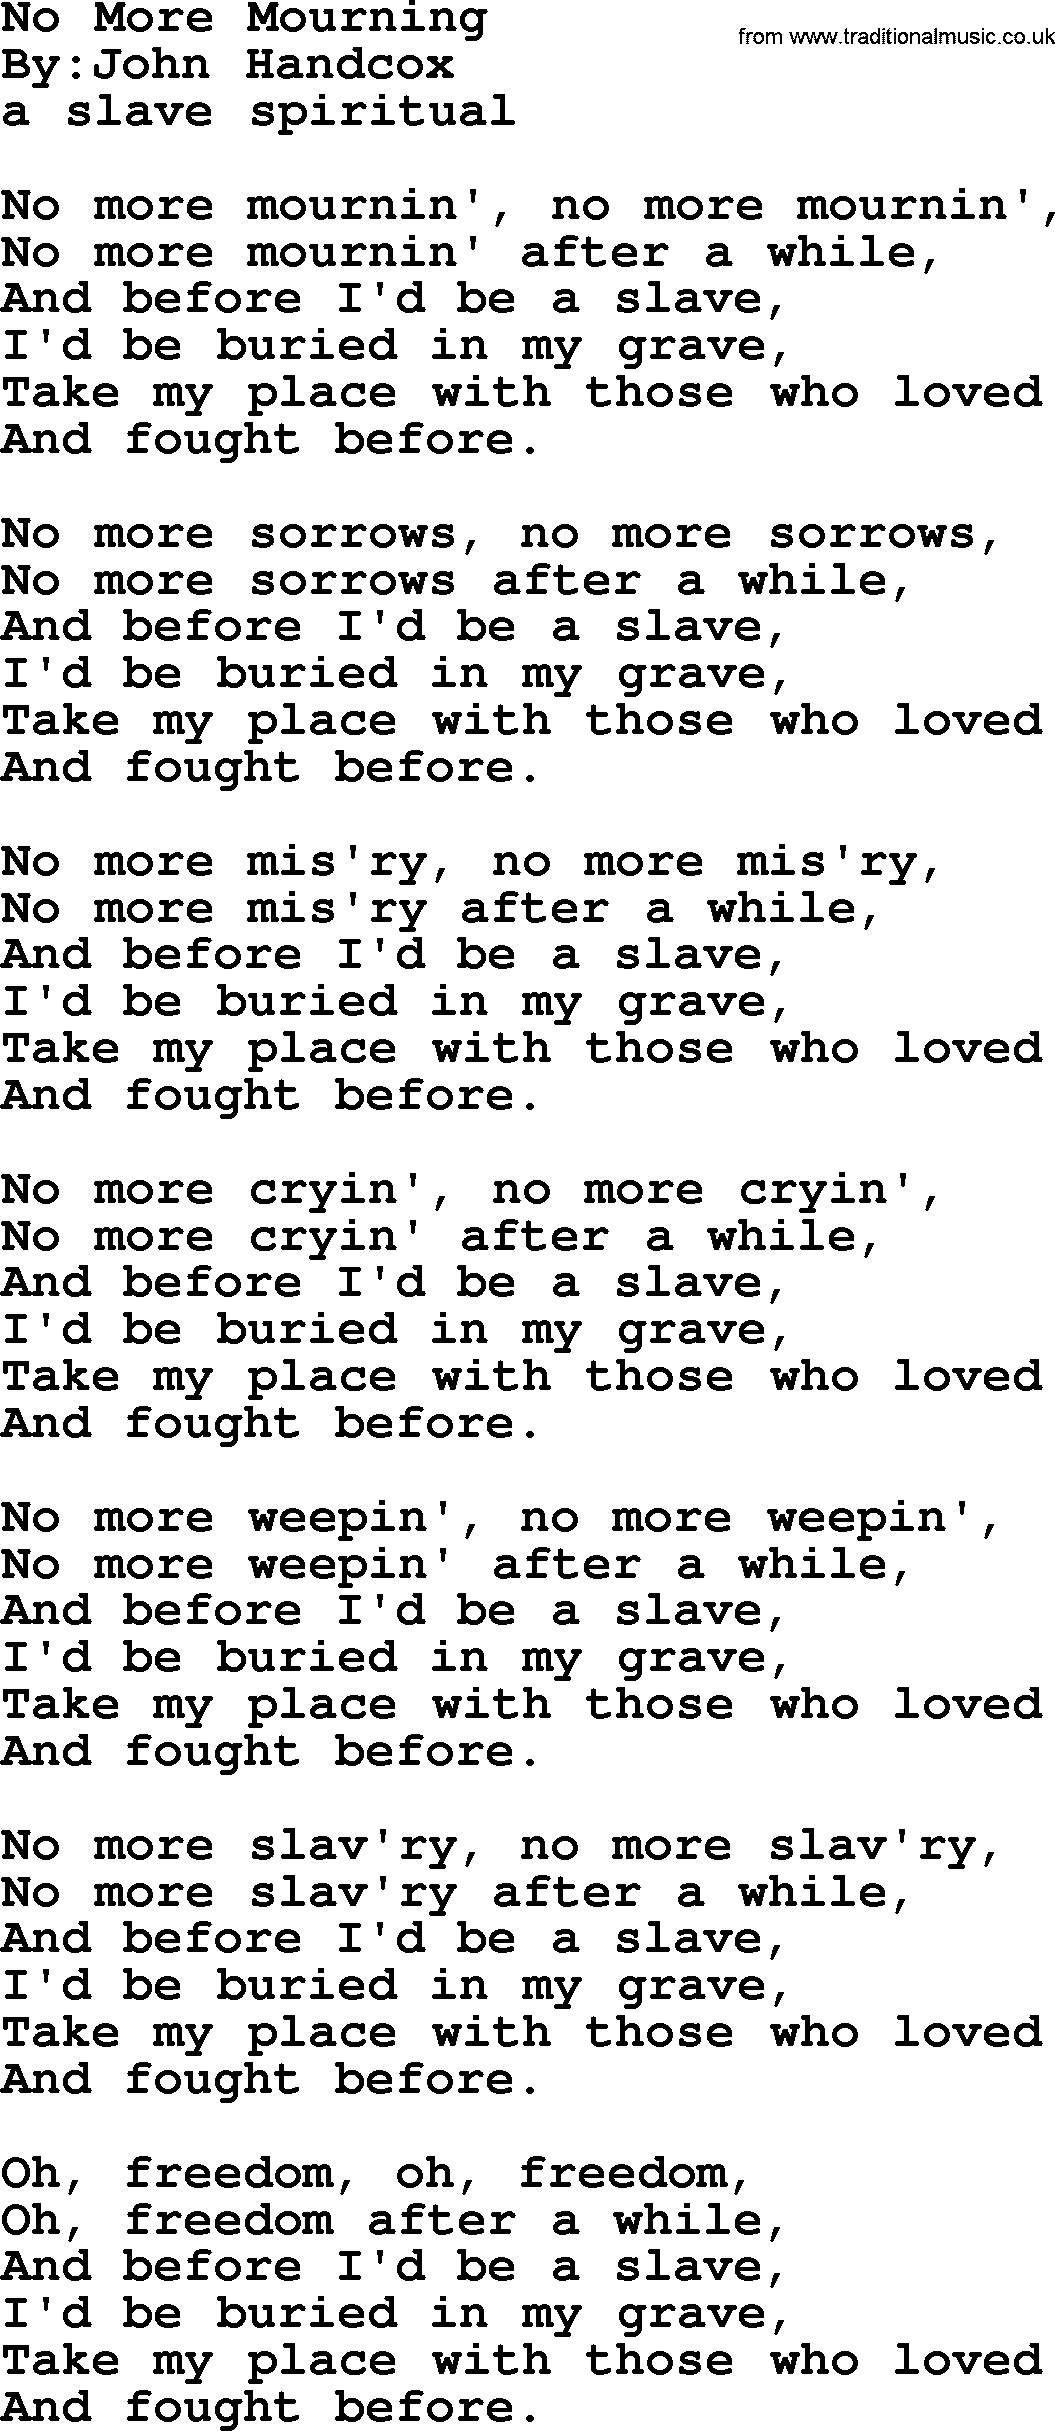 Political, Solidarity, Workers or Union song: No More Mourning, lyrics